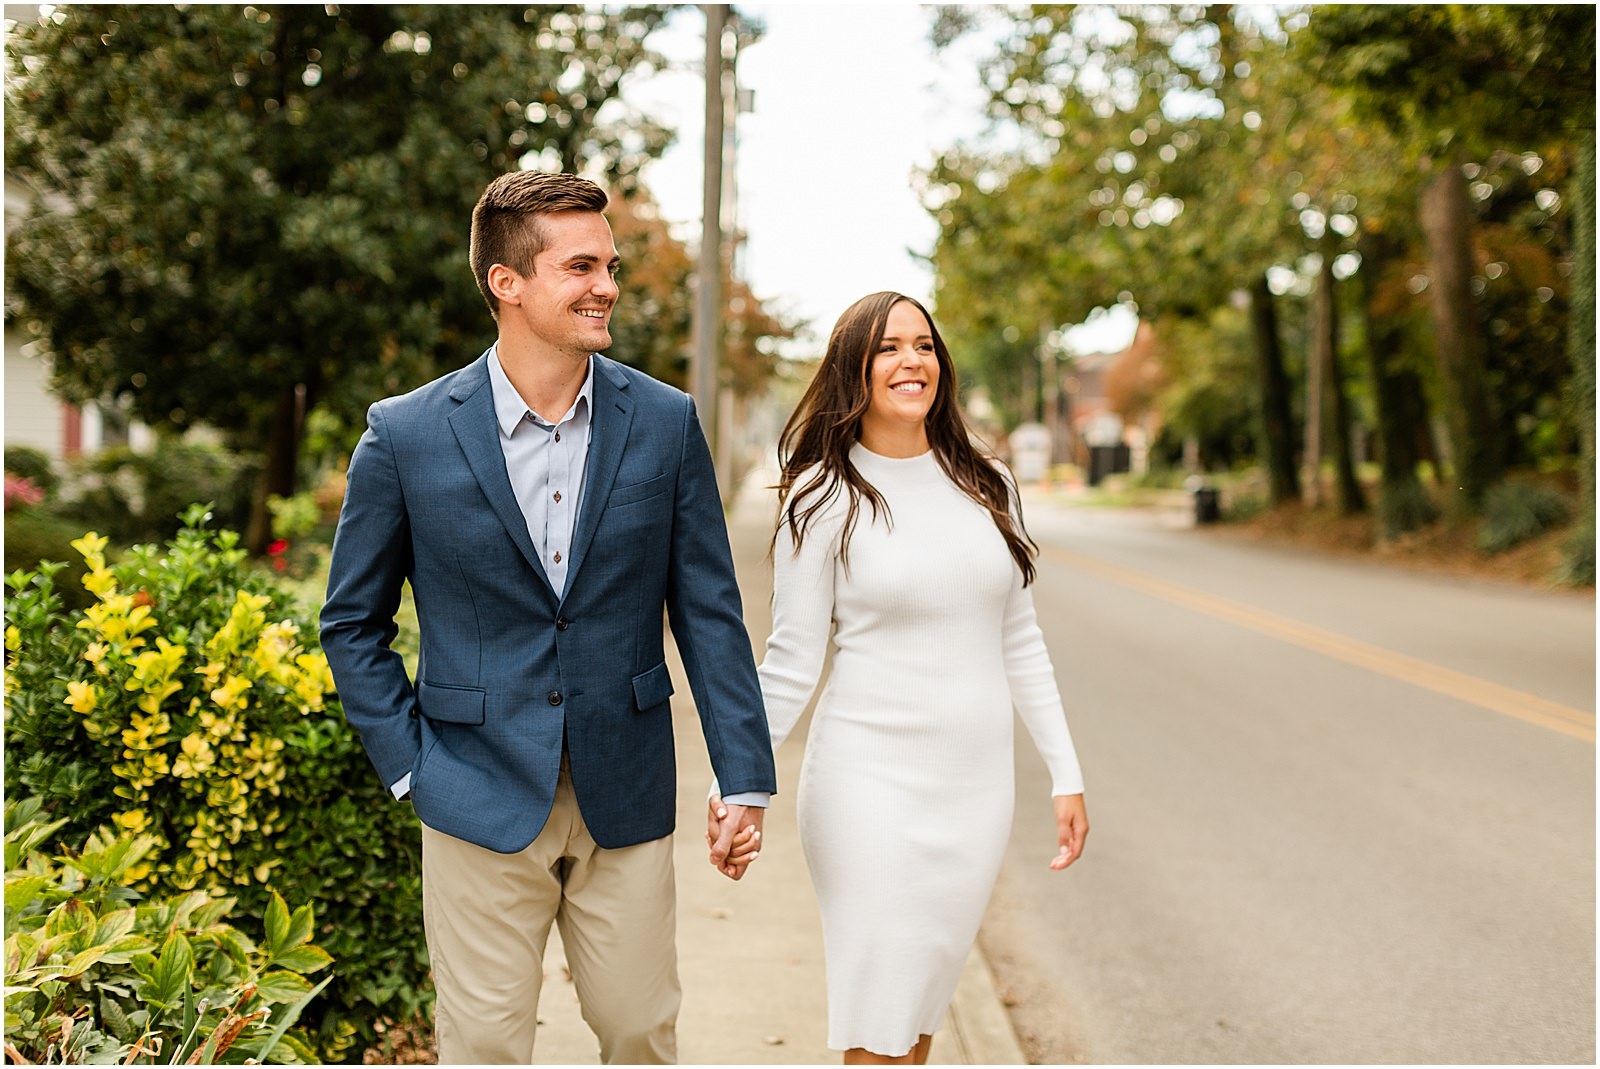 Emma and Jace's Downtown Newburgh Engagement Session | Bret and Brandie Photography | Evansville Indiana Wedding Photographers_0019.jpg